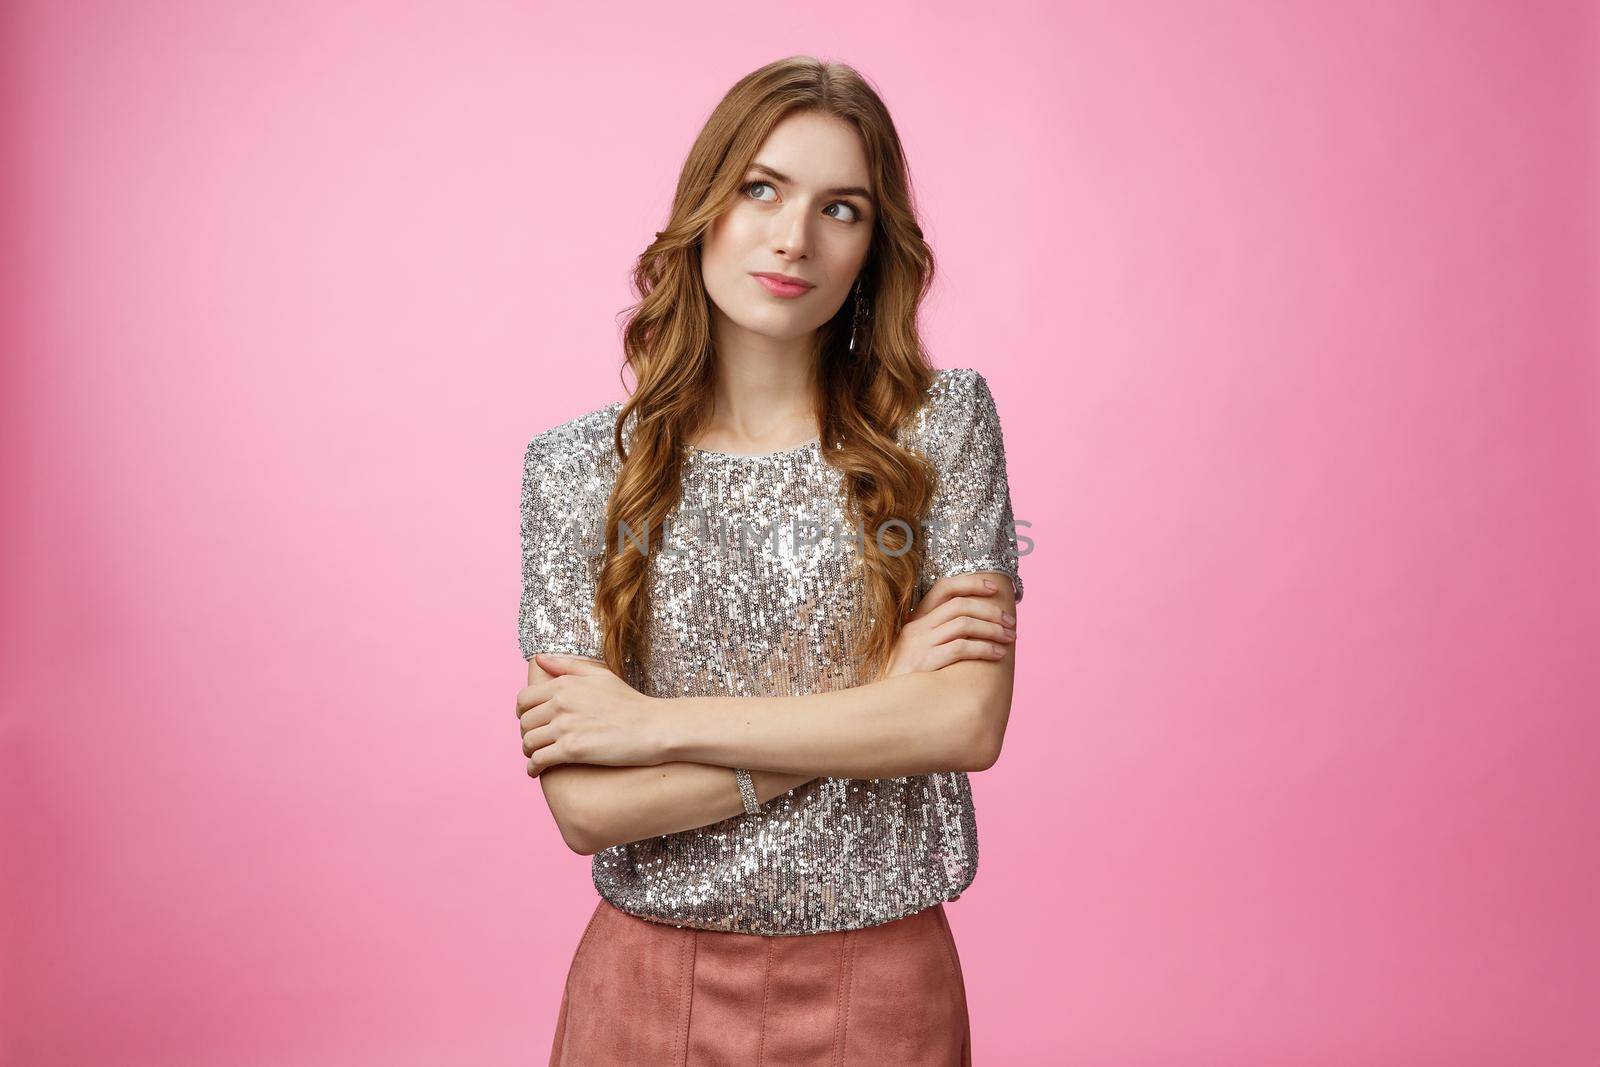 Cutiour thoughtful charming young caucasian female dress-up party night-out look up thinking dreaming, have idea consider were go, standing pleased upbeat ready have fun all night, pink background.